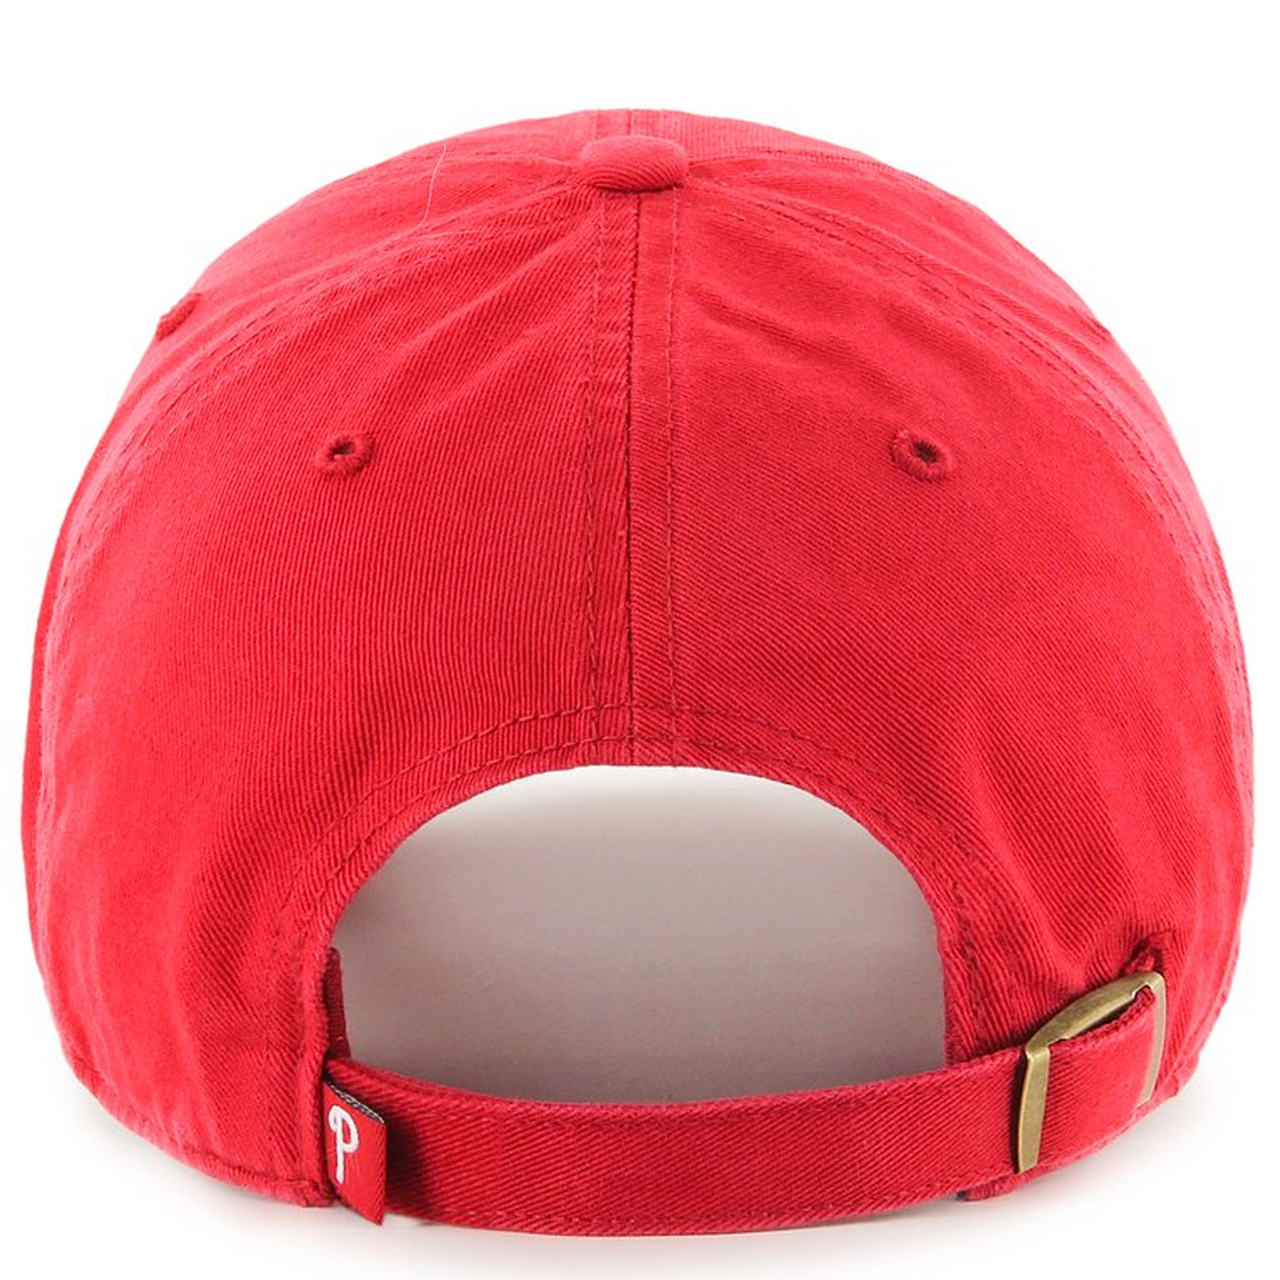 on the back of the philadelphia phillies red dad hat is a red adjustable strap